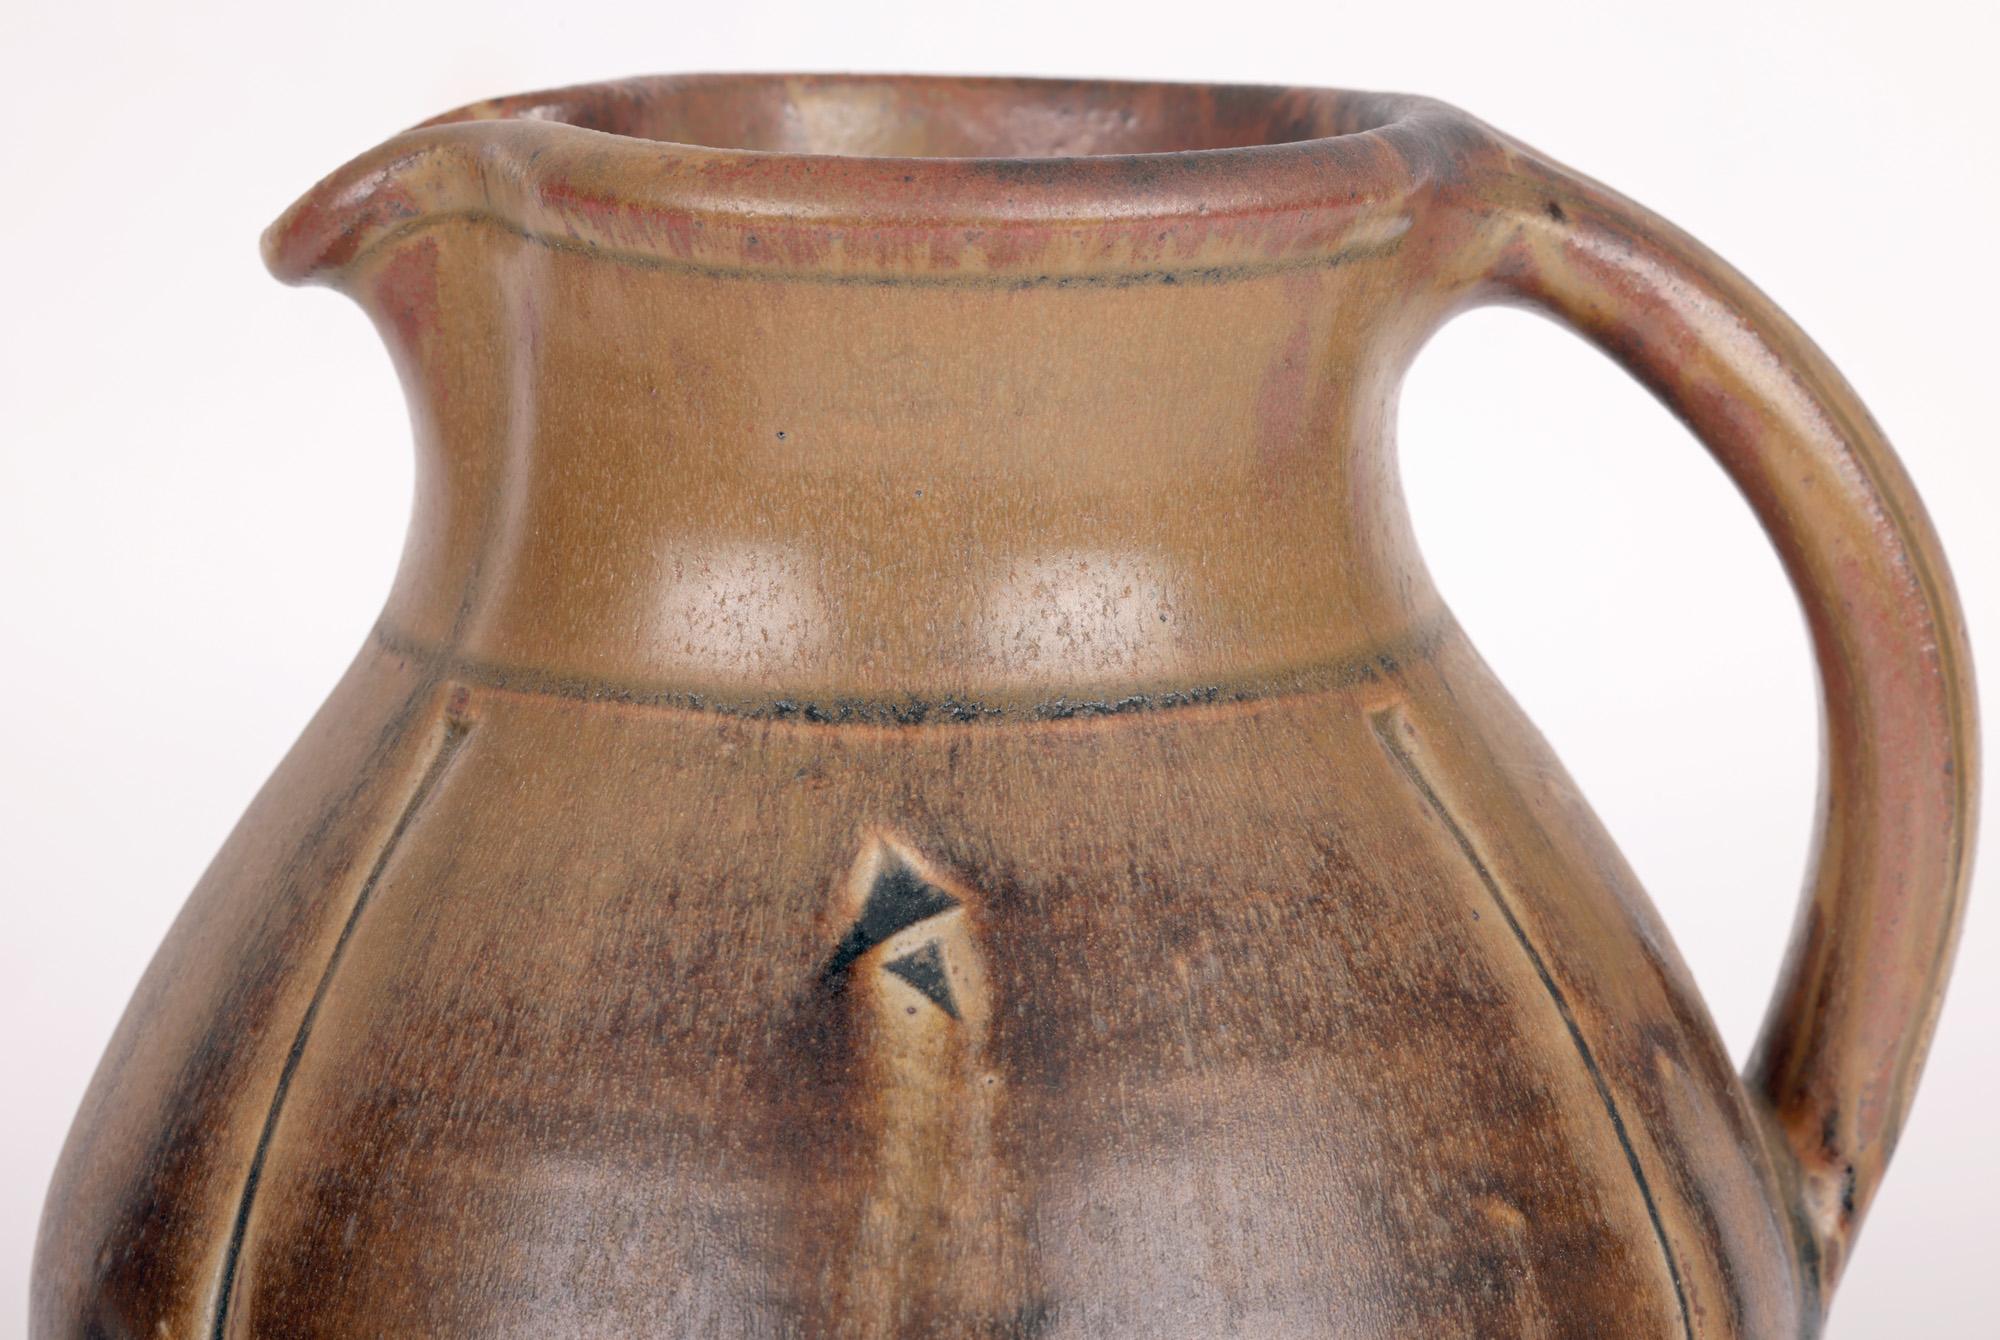 A large and stylish Cotswold Pottery studio pottery jug with incised patterning by renowned potter John Jelfs (British. b.1946) and dating from around 1997. The heavily made stoneware jug is of rounded bulbous shape standing on a flat round unglazed